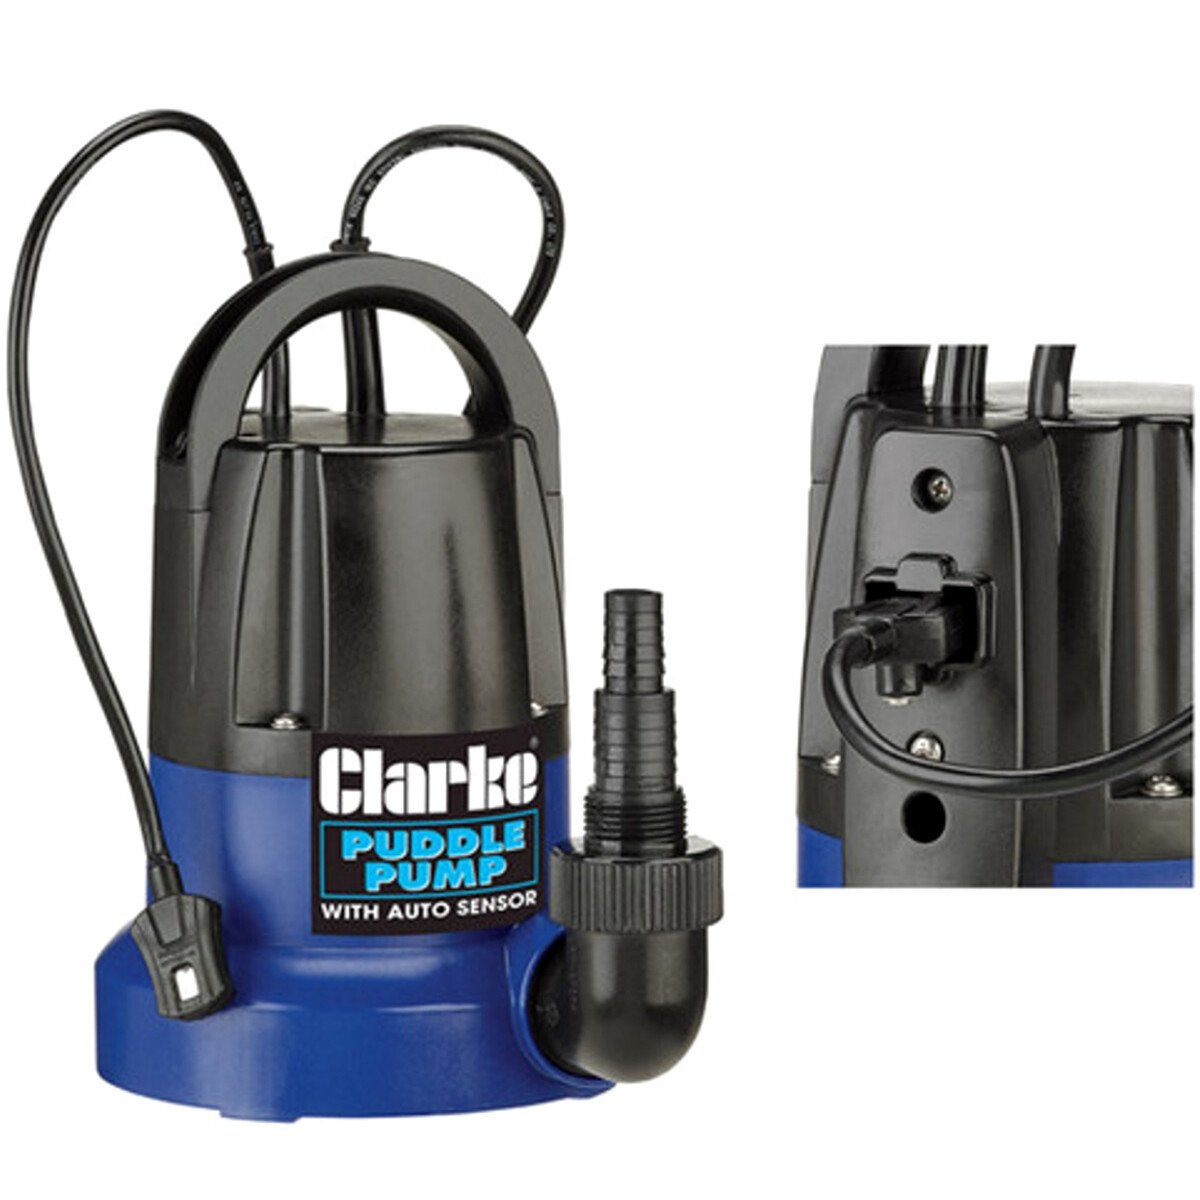 Clarke PSP105 250W 230v Clean Water Puddle Pump with Auto Sensor 7230693